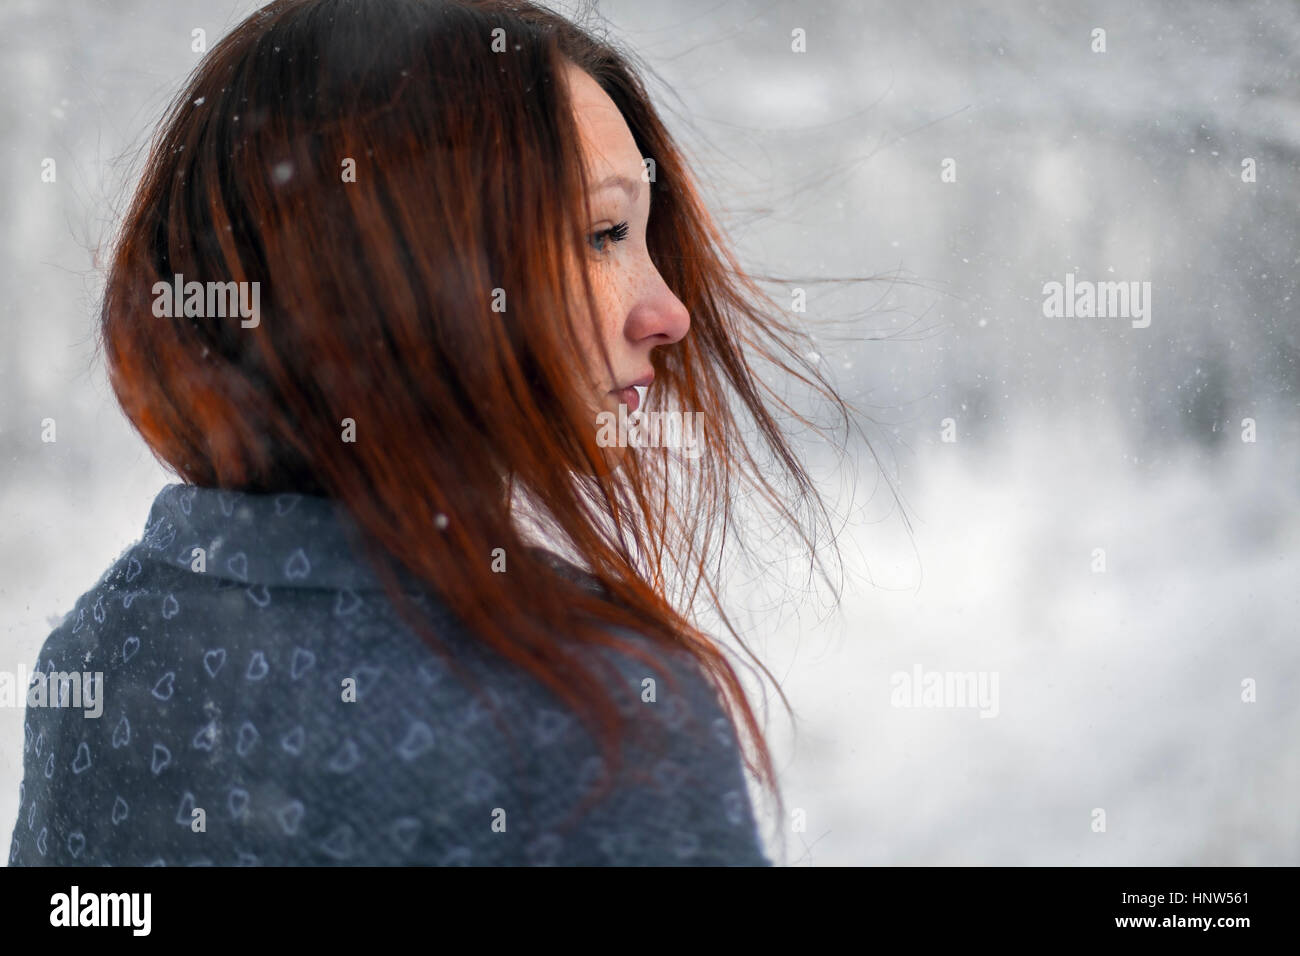 Hair of Caucasian woman blowing in wind in winter Stock Photo